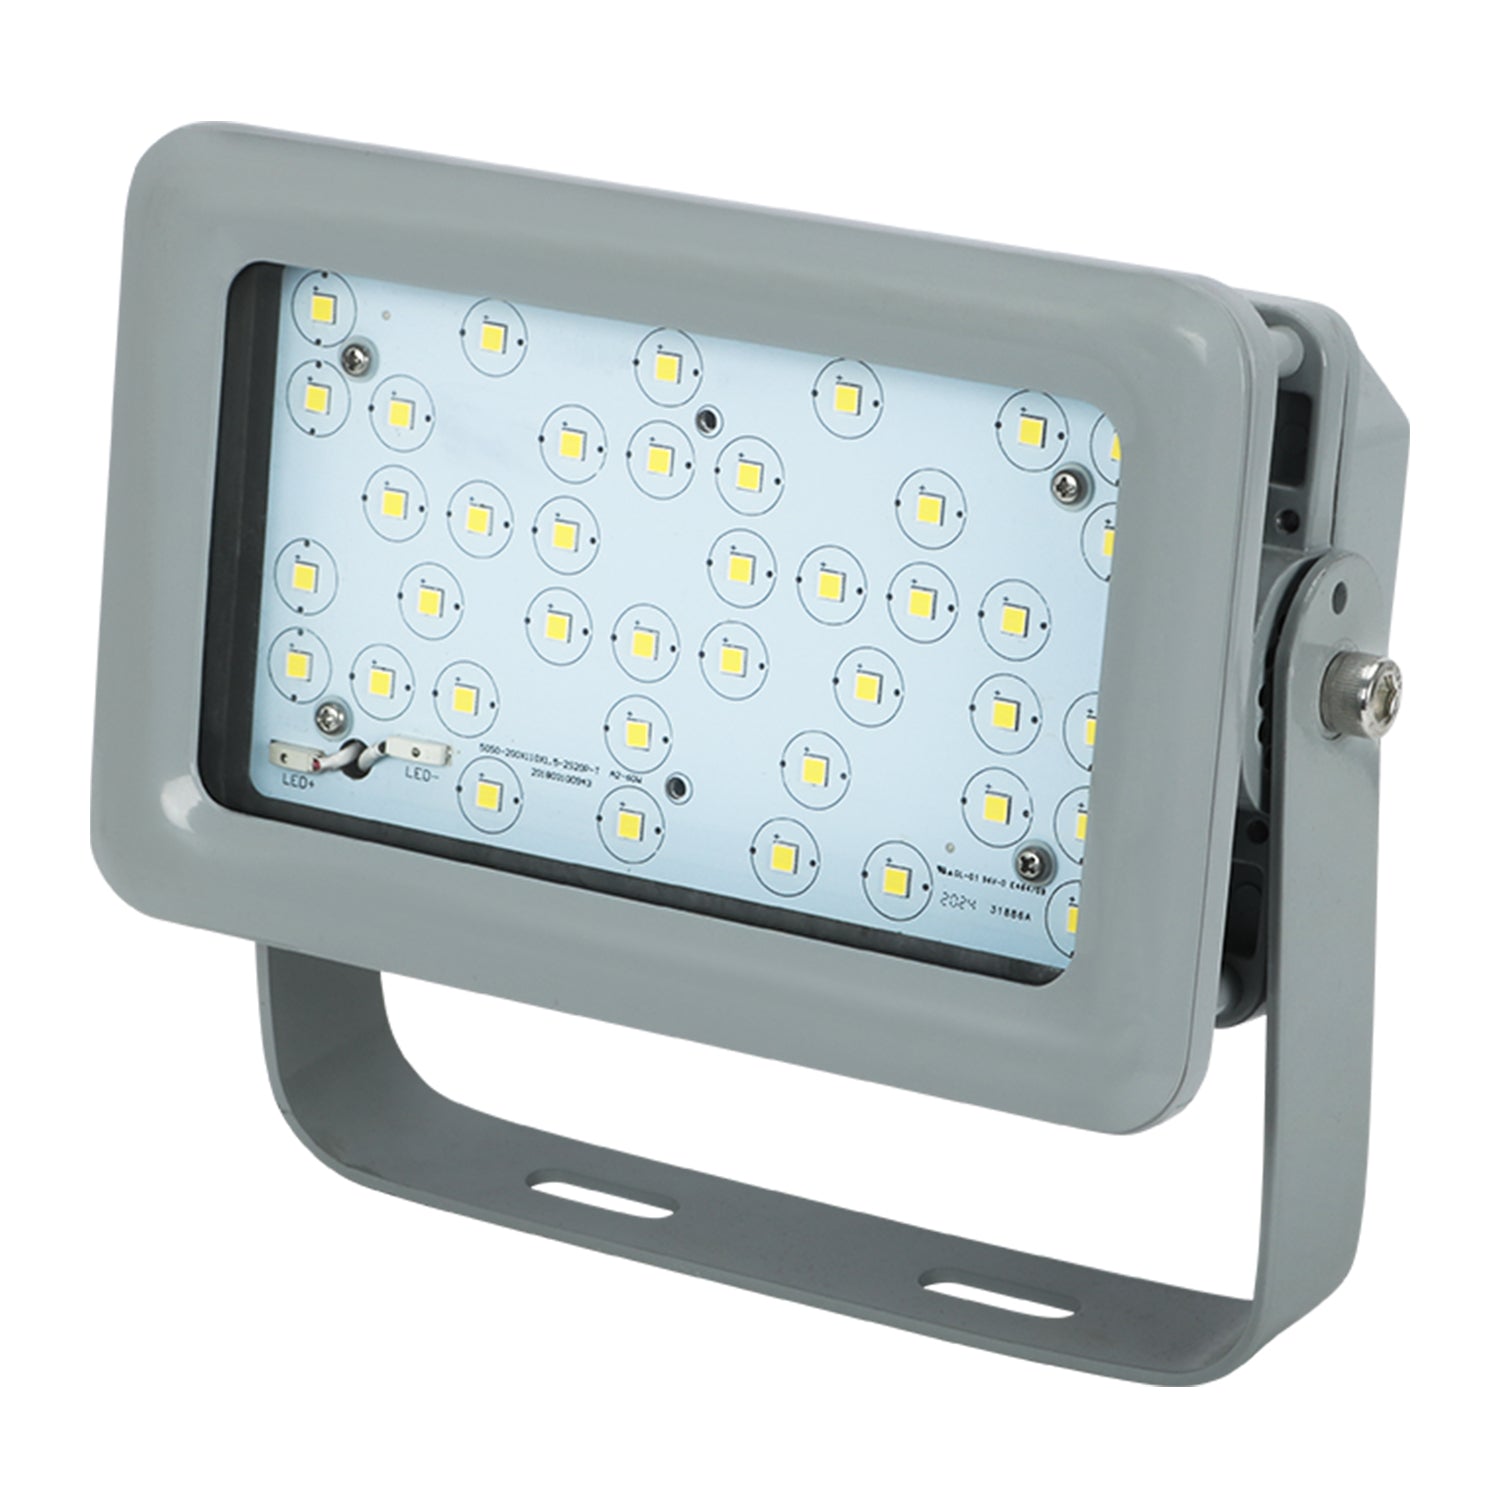 LED Explosion-Proof Flood Light - 150W - 5000K, 20250Lumens Non-Dimmable, IP66 Rated, Maximum Coverage and Durability